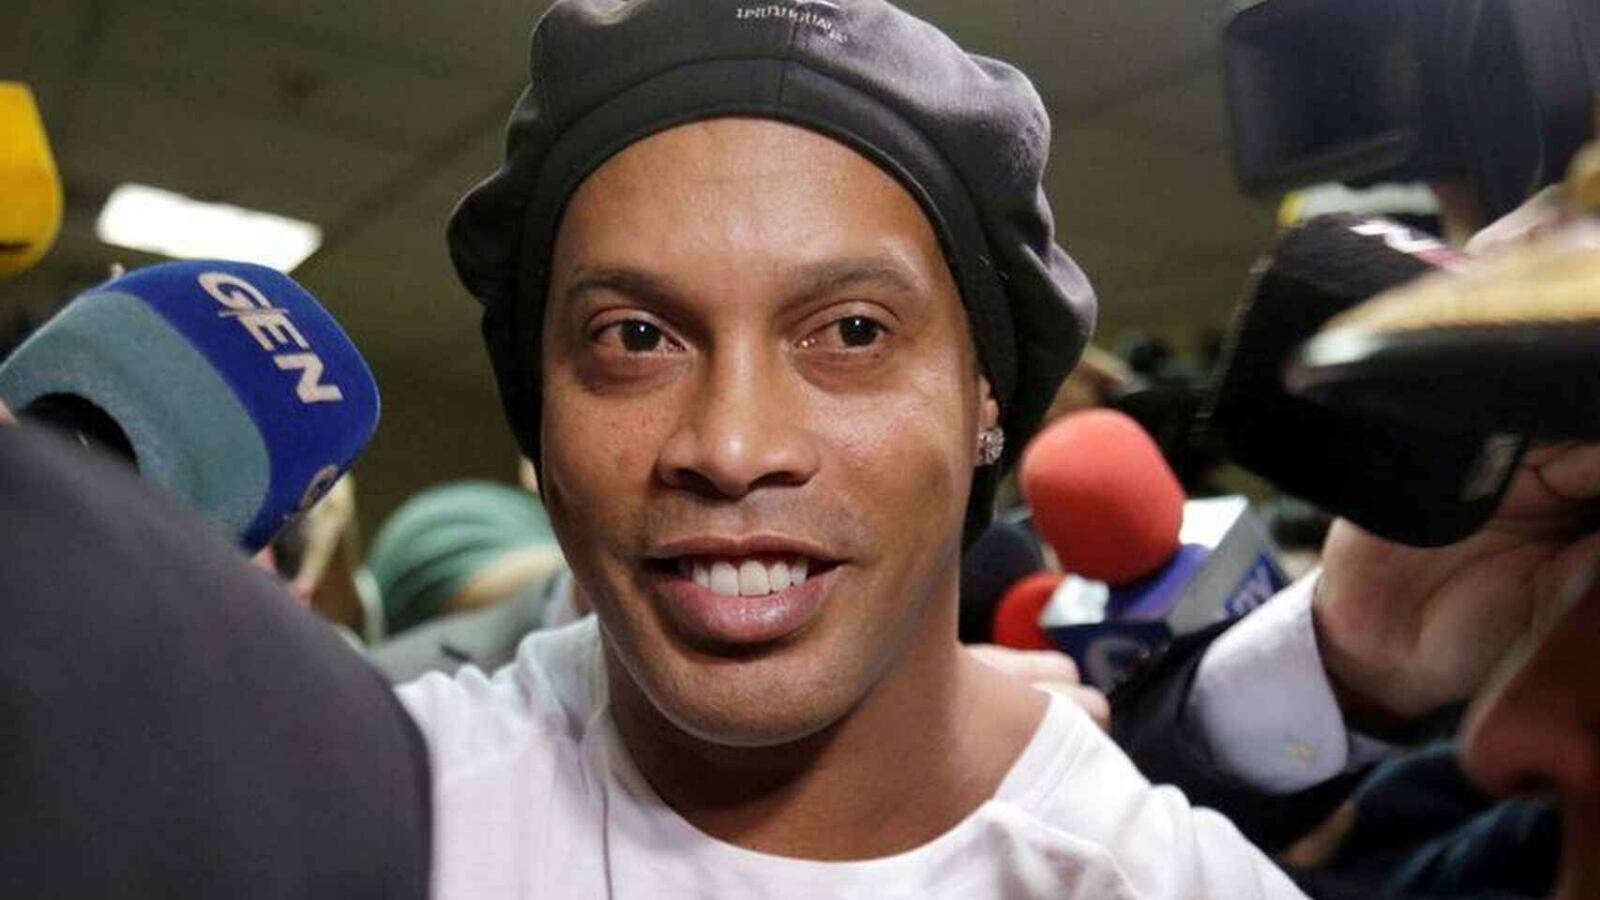 Ronaldinho's unusual clause in his contract with Flamengo that allowed him to have parties